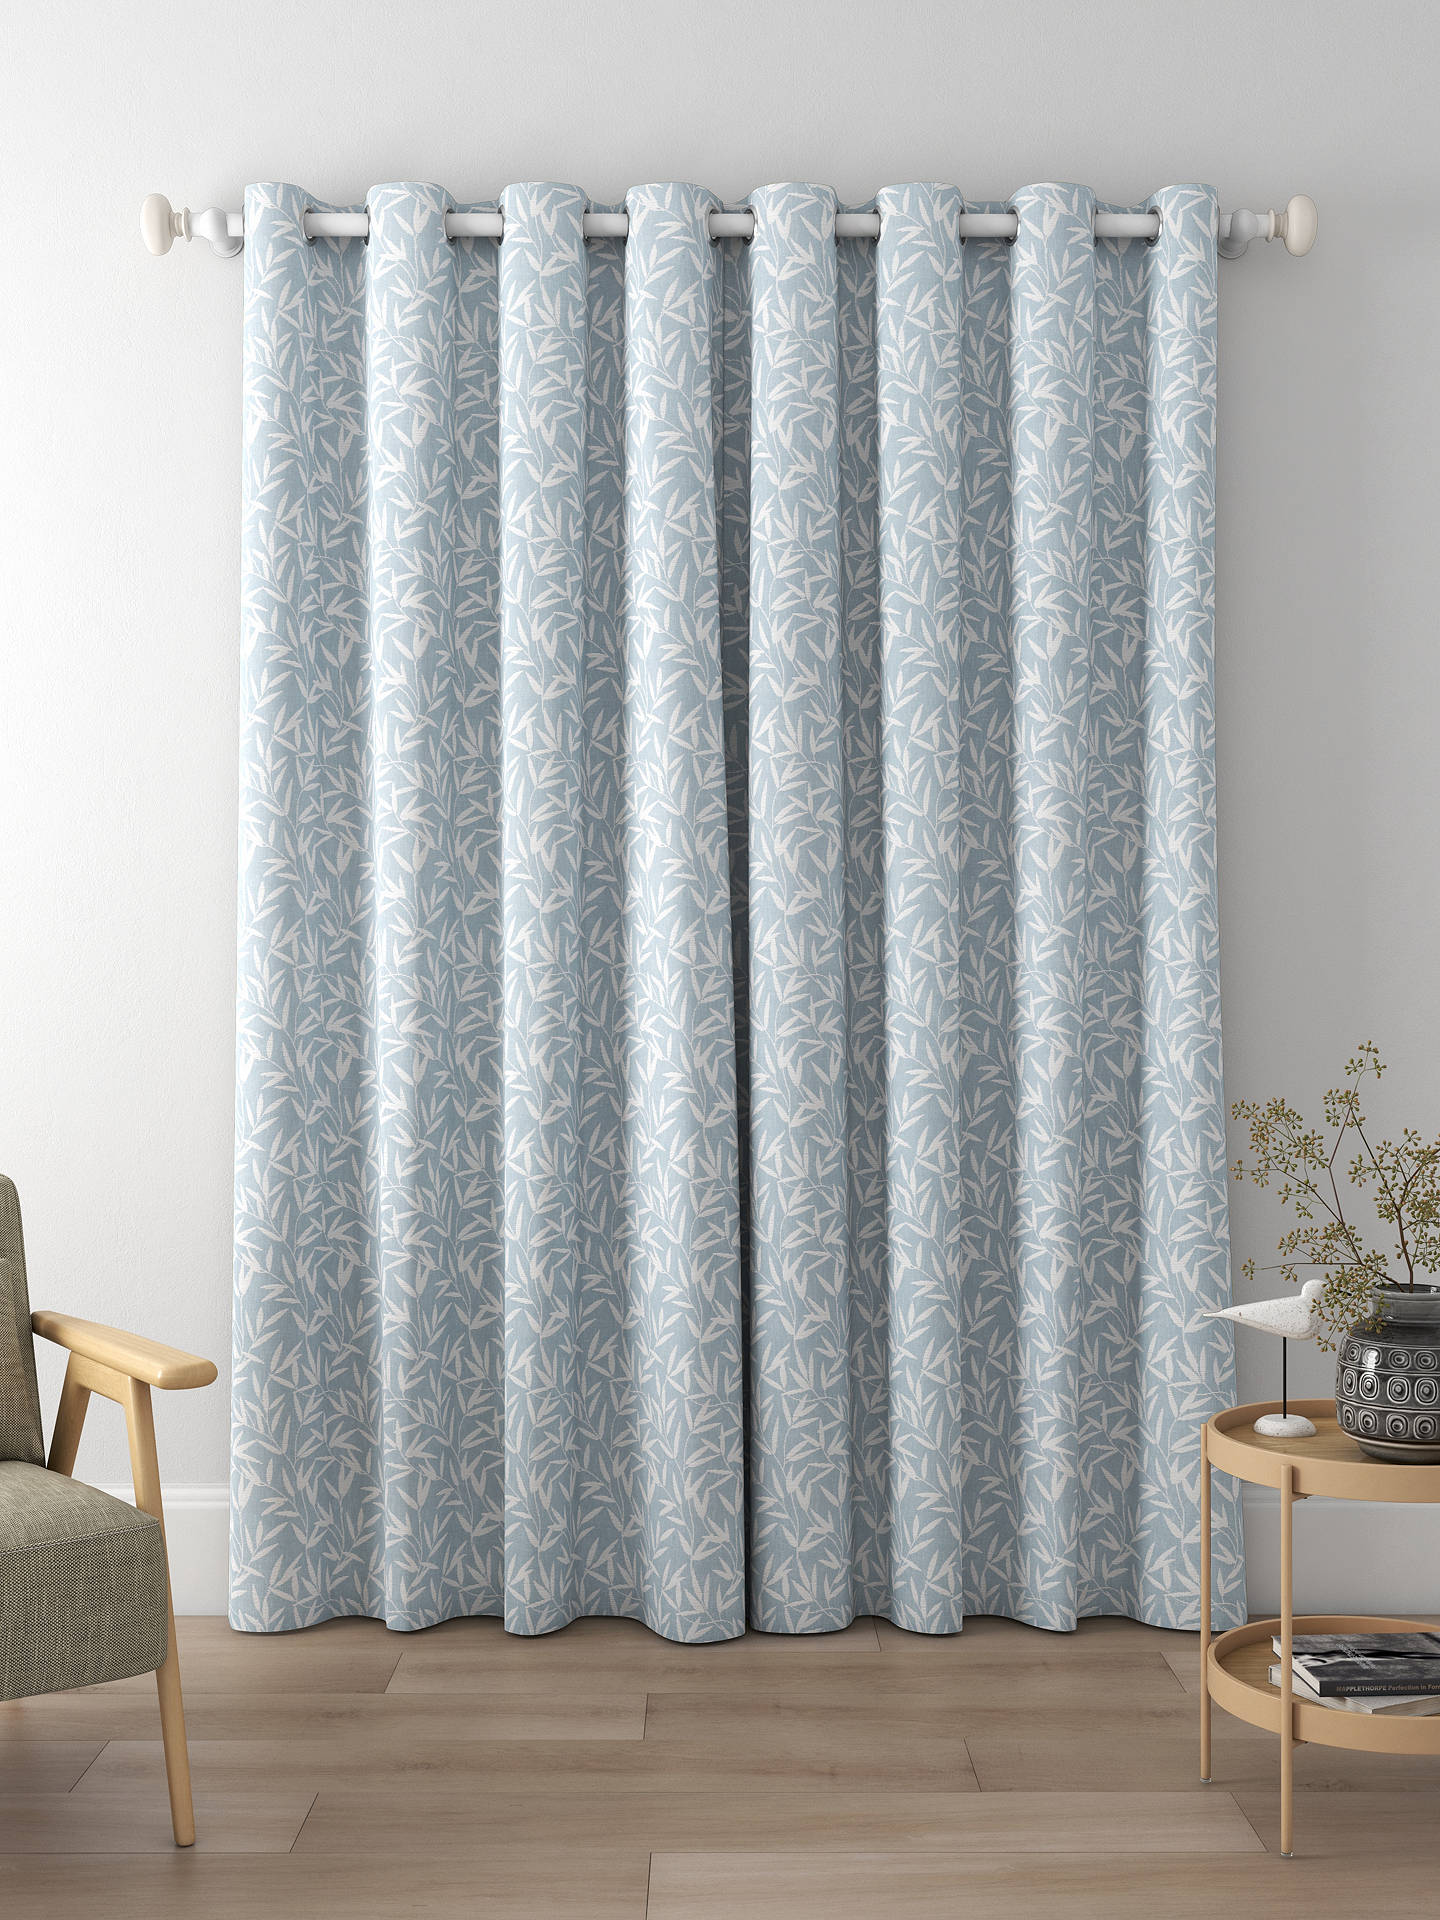 Laura Ashley Willow Leaf Chenille Made to Measure Curtains, Pale Seaspray